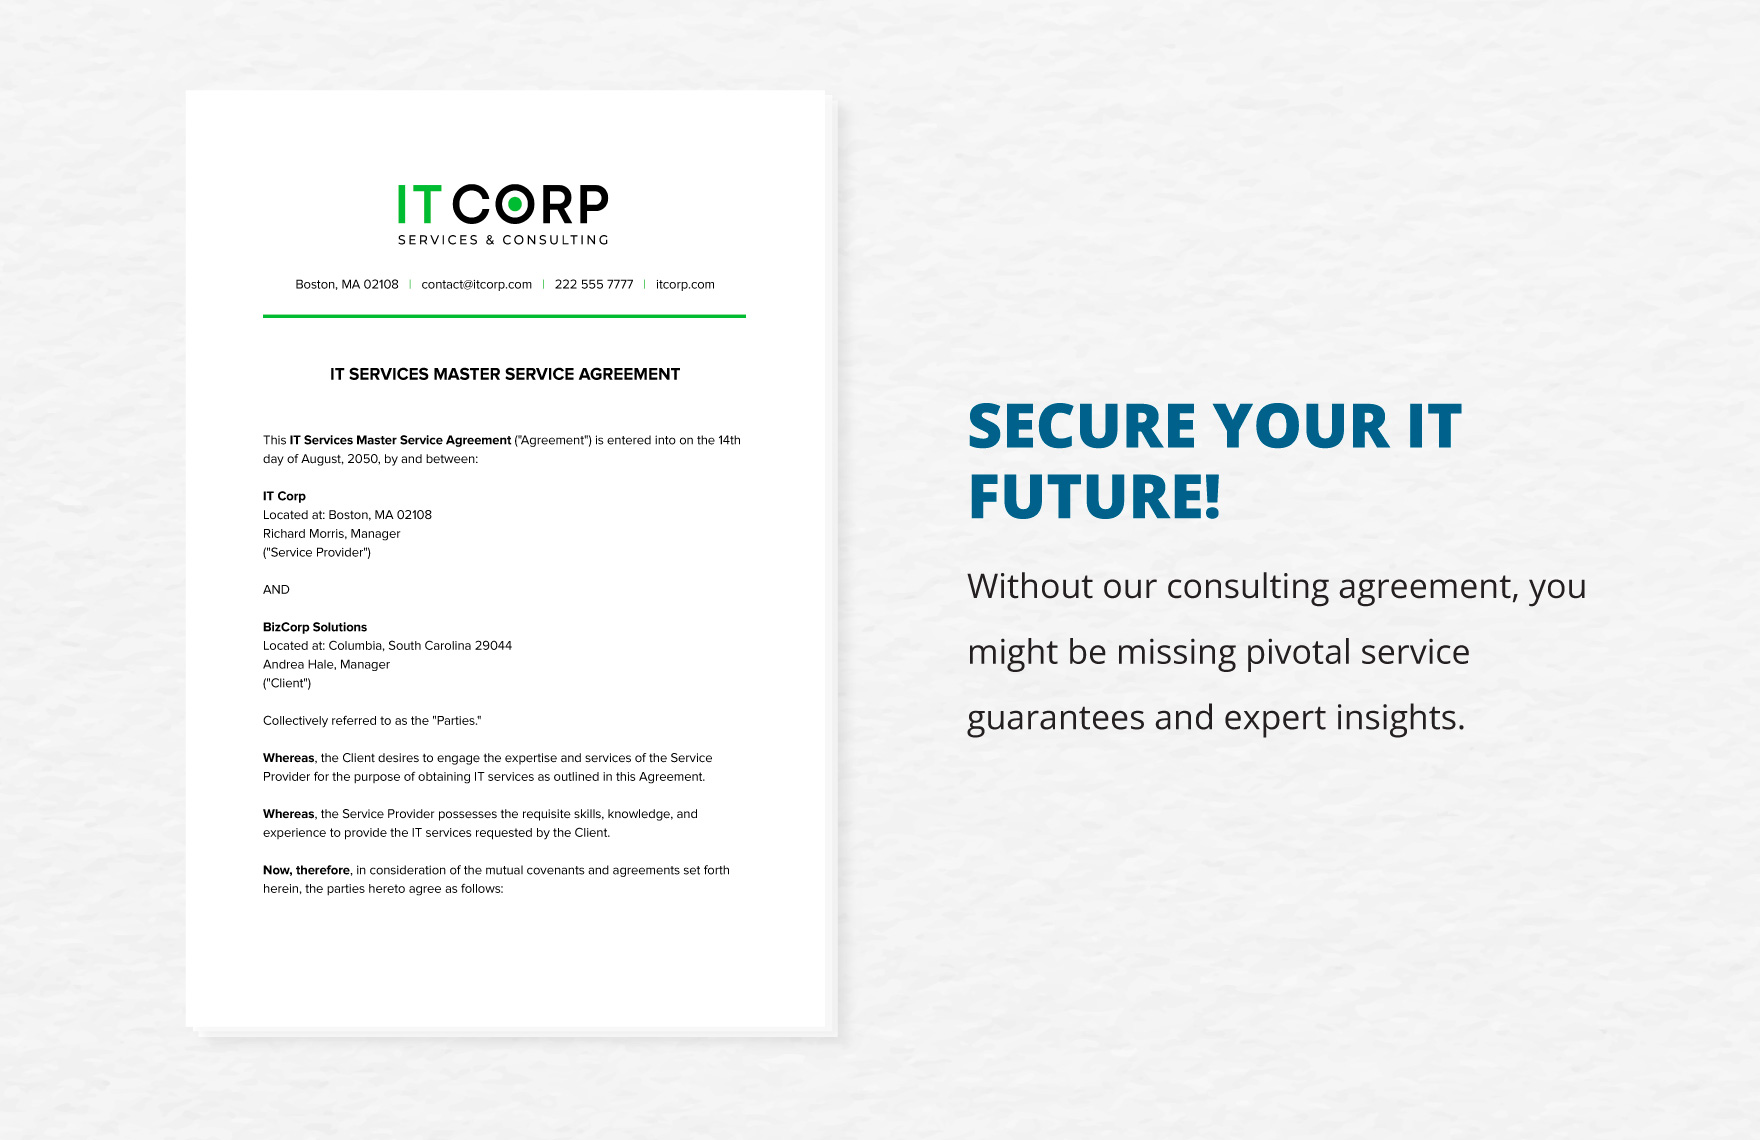 IT Services Master Service Agreement Template